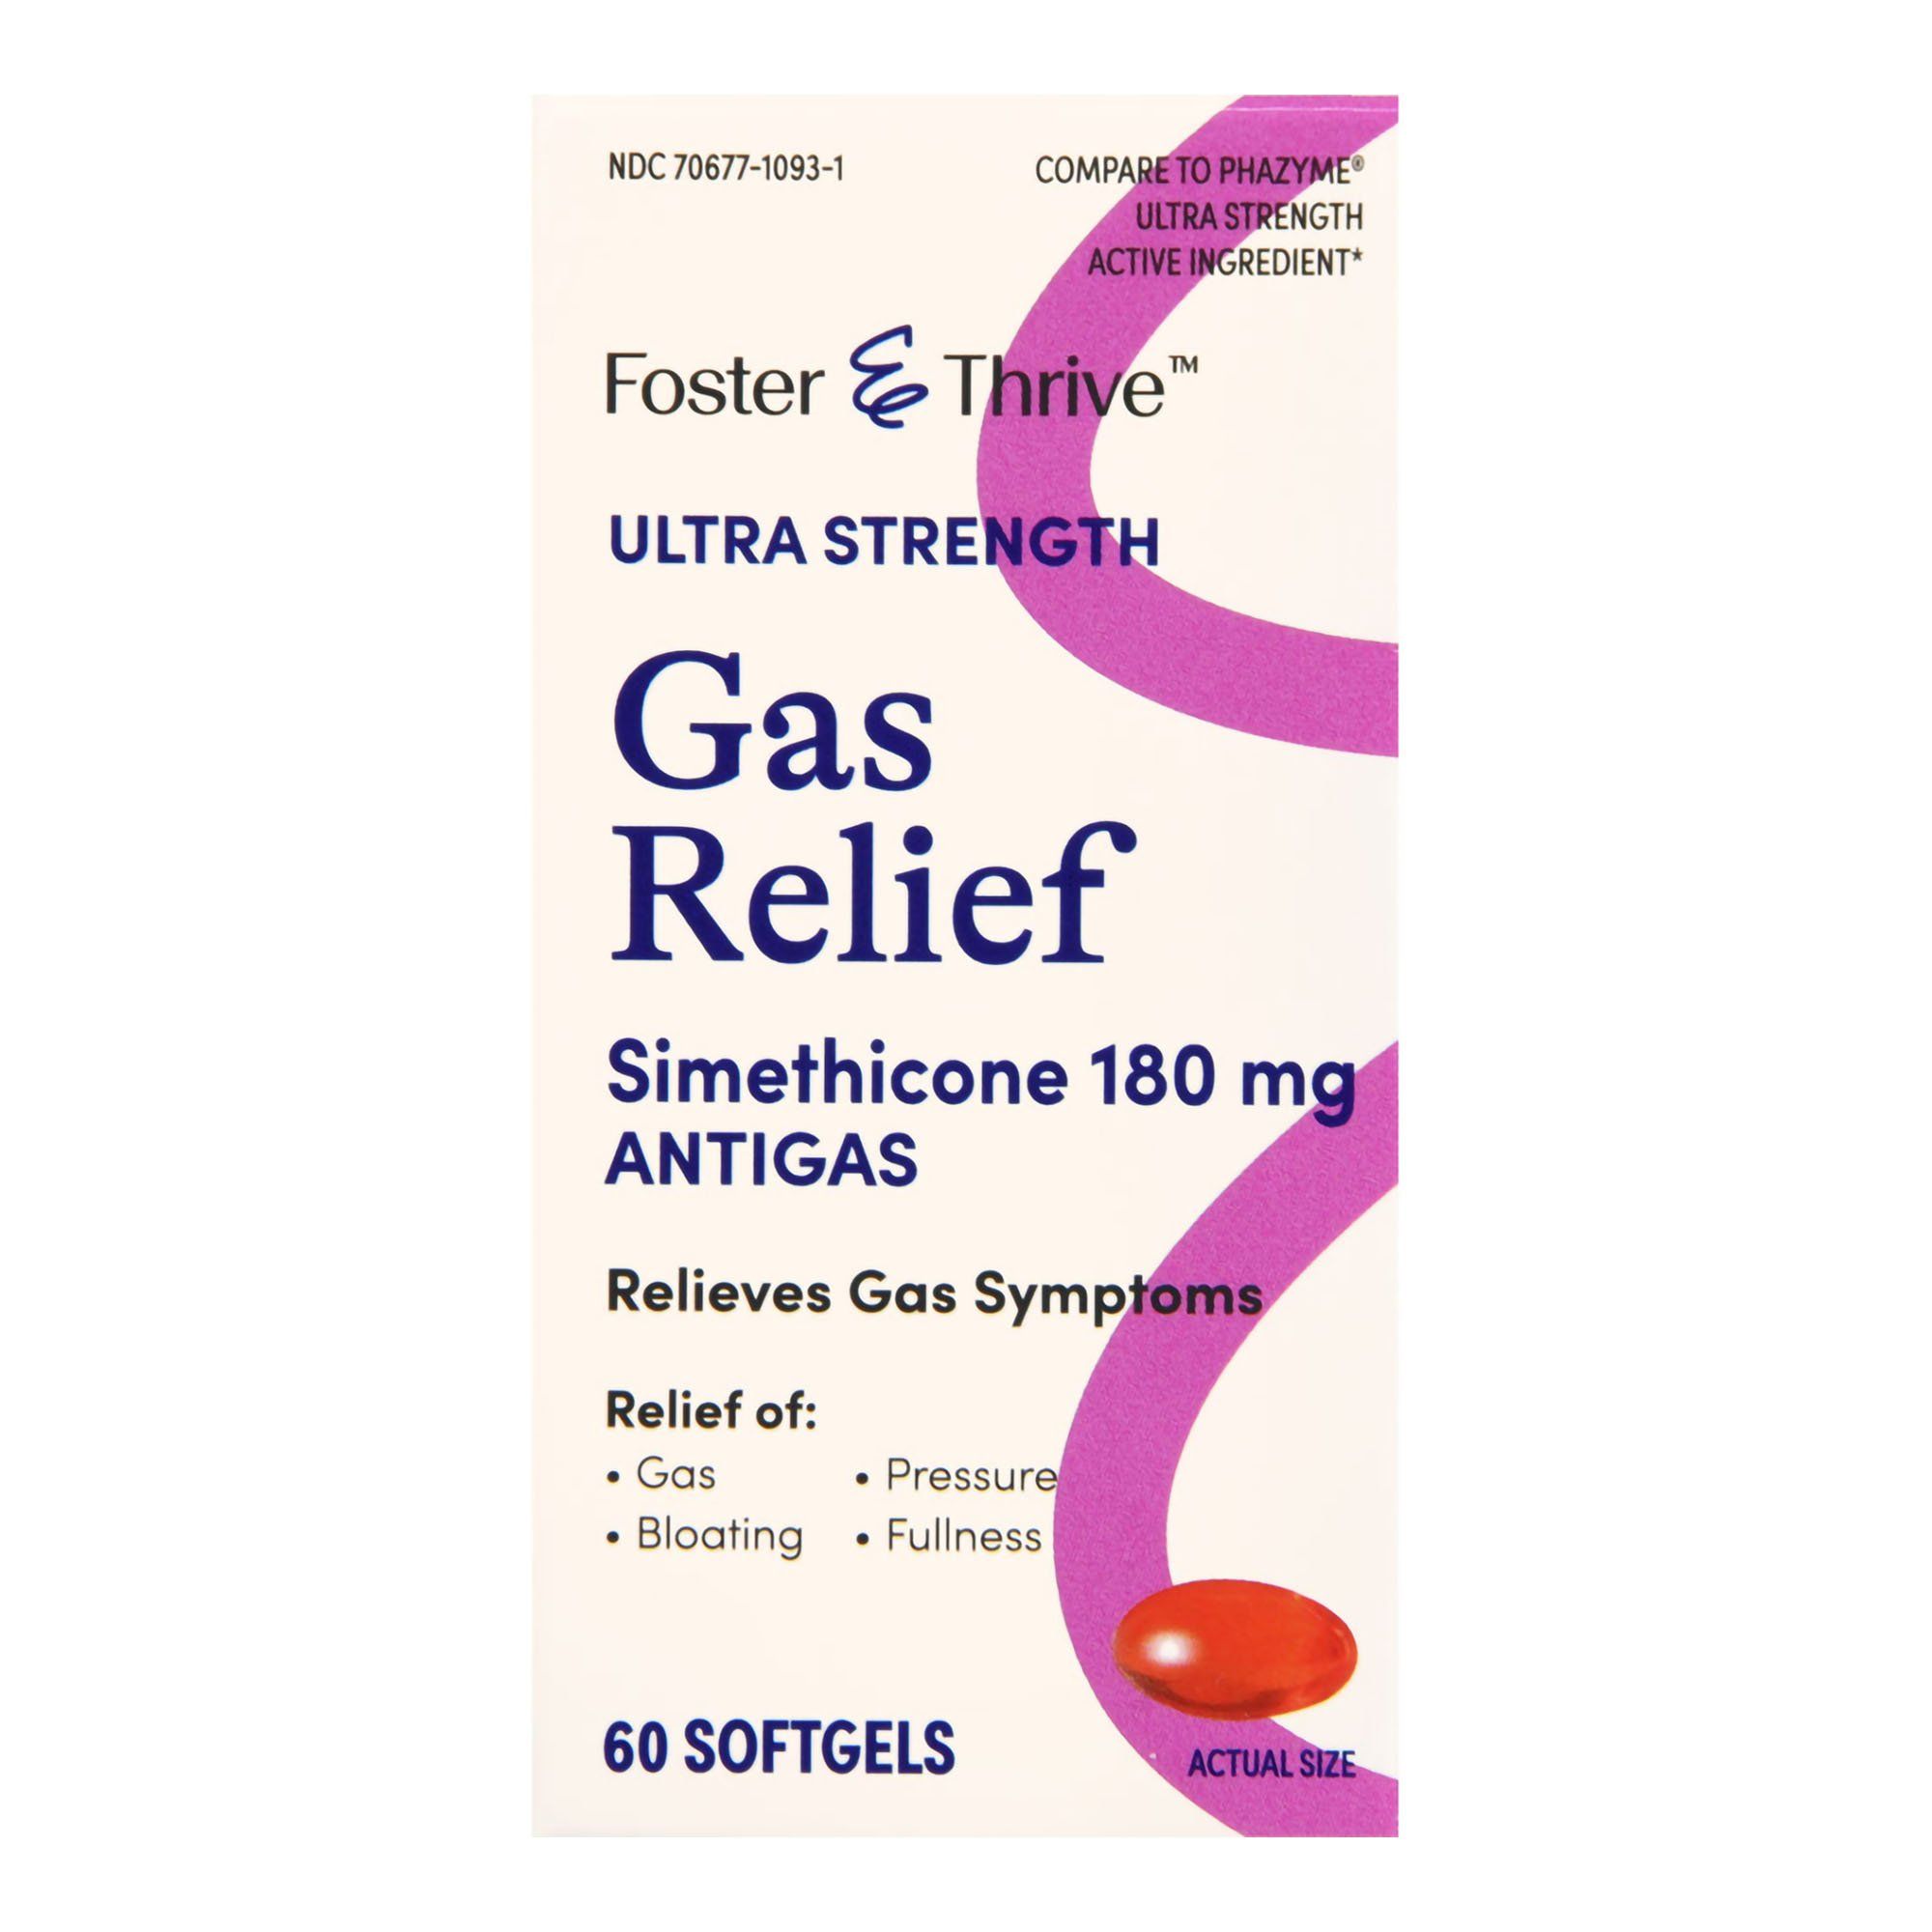 Foster & Thrive Ultra Strength Gas Relief Simethicone SoftGels, 180 mg - 60 ct